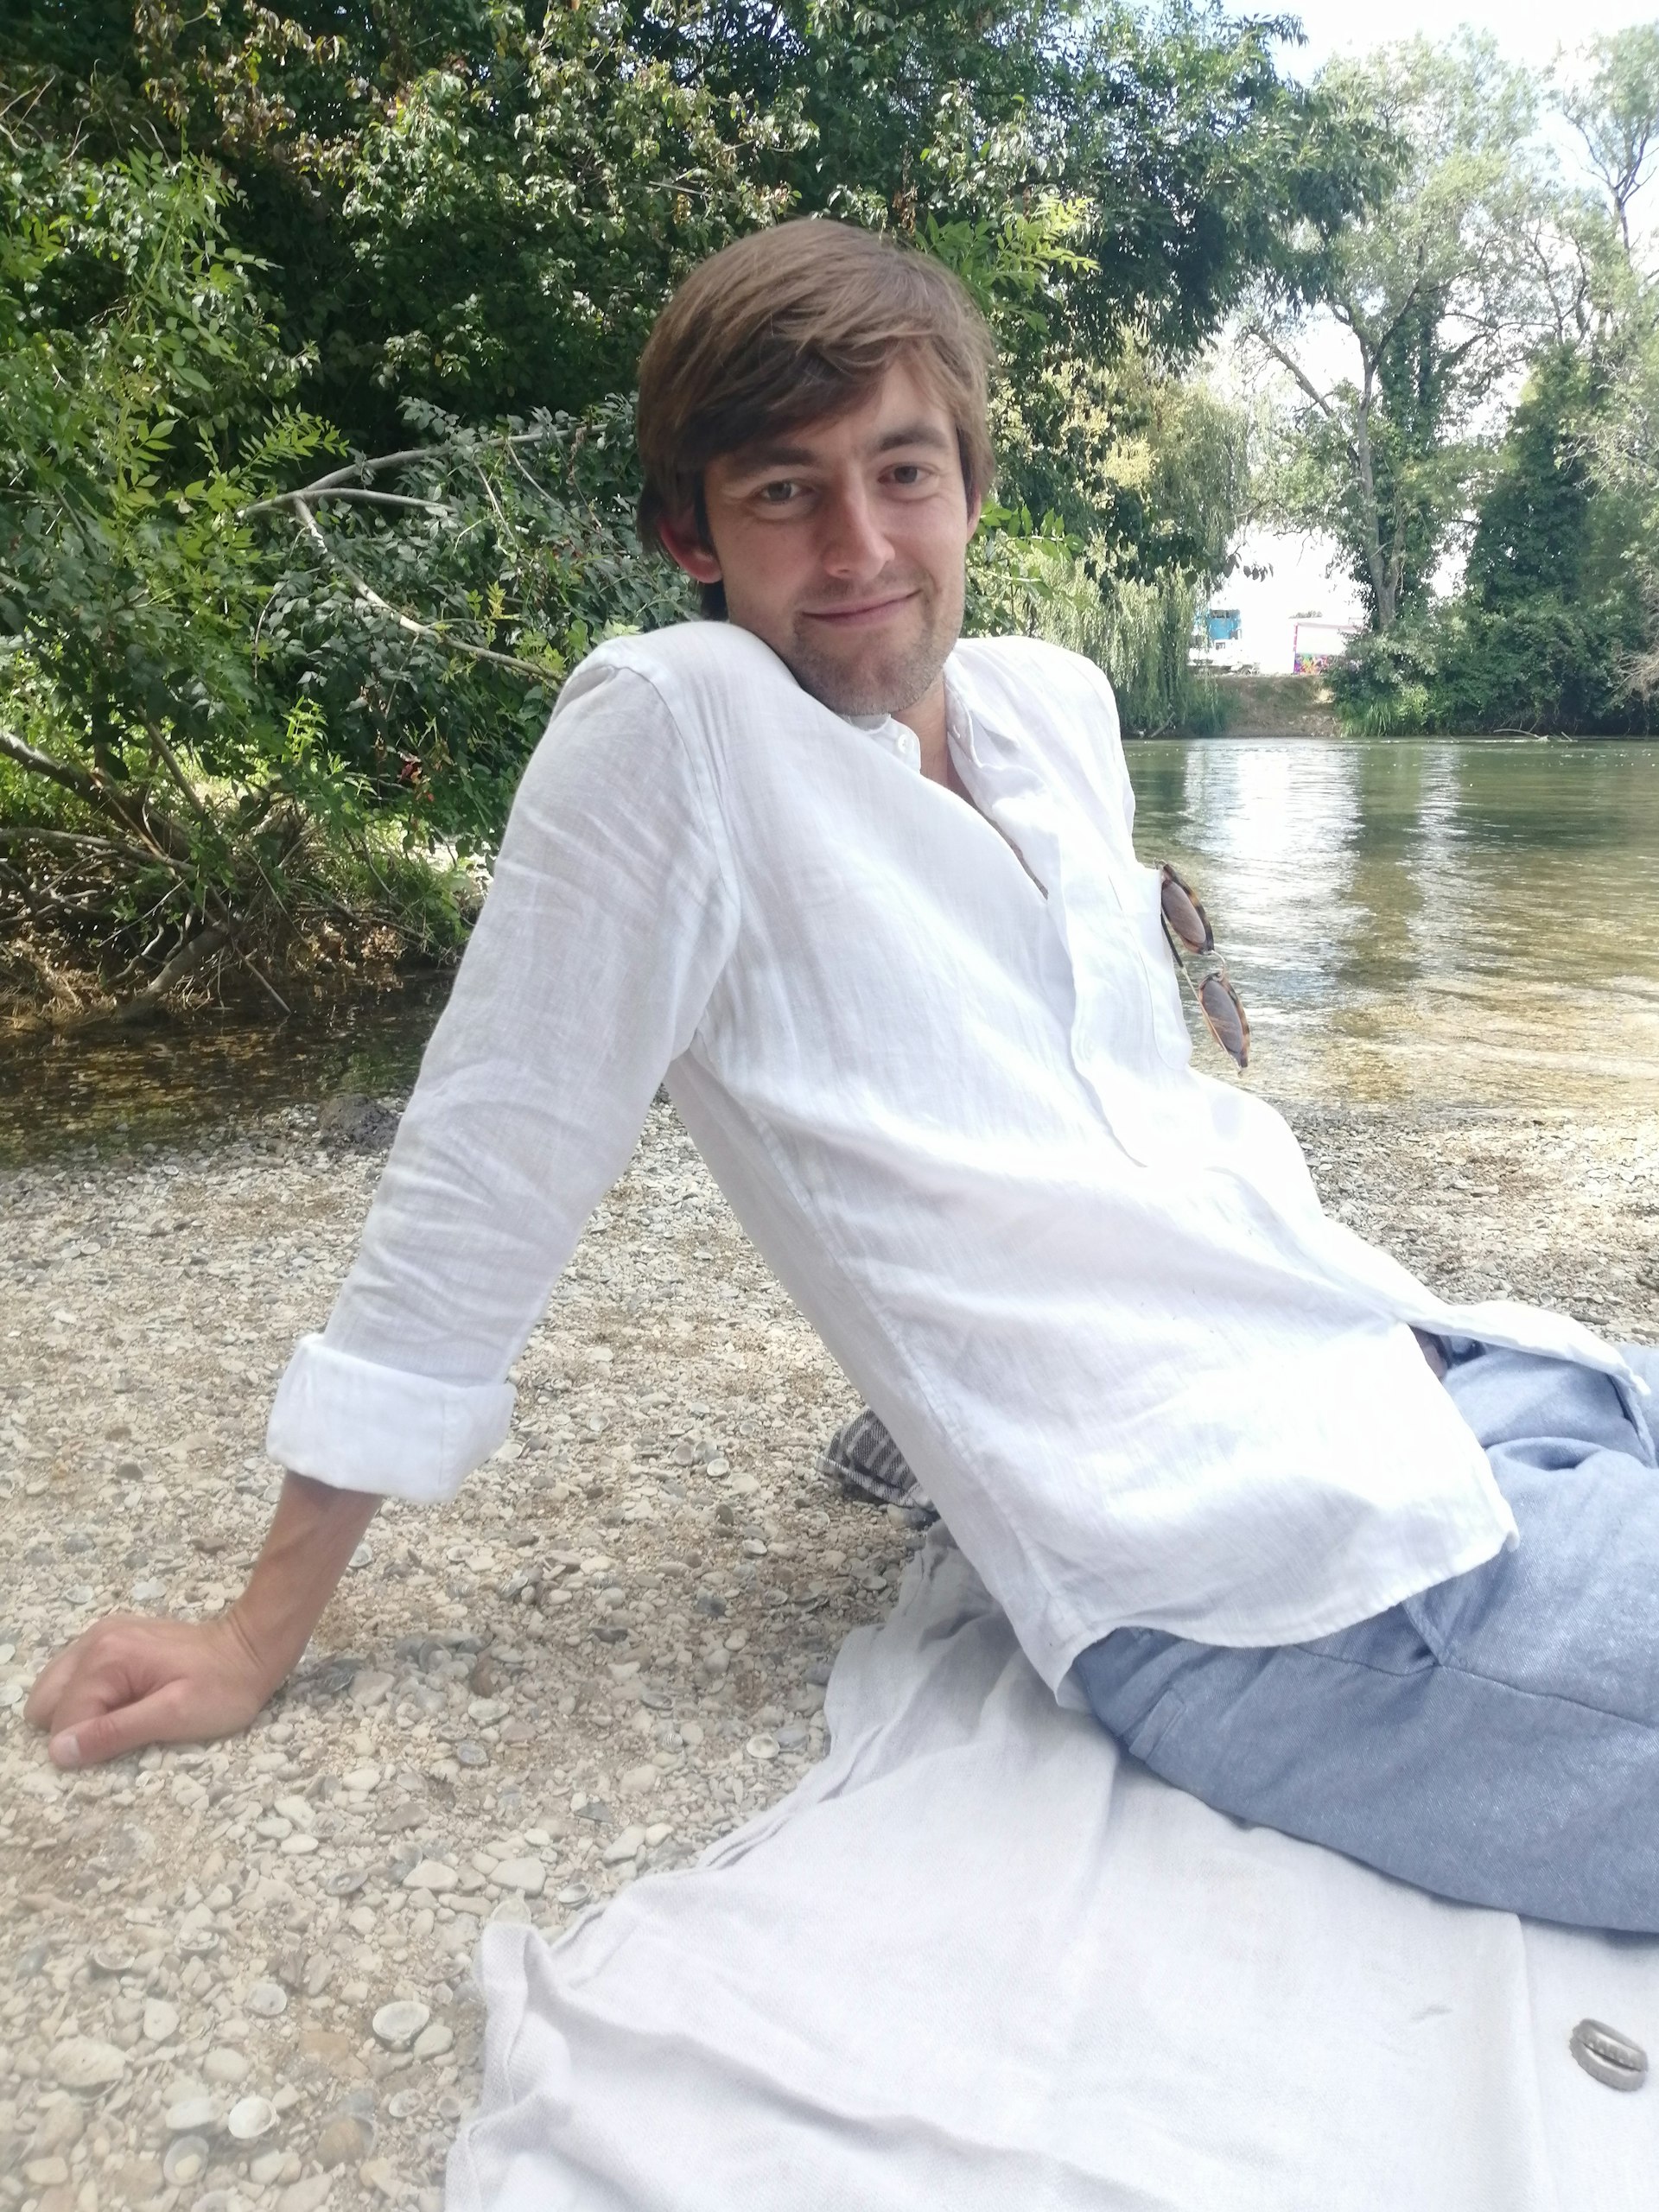 A white man with brown hair sits by a river smiling at the camera